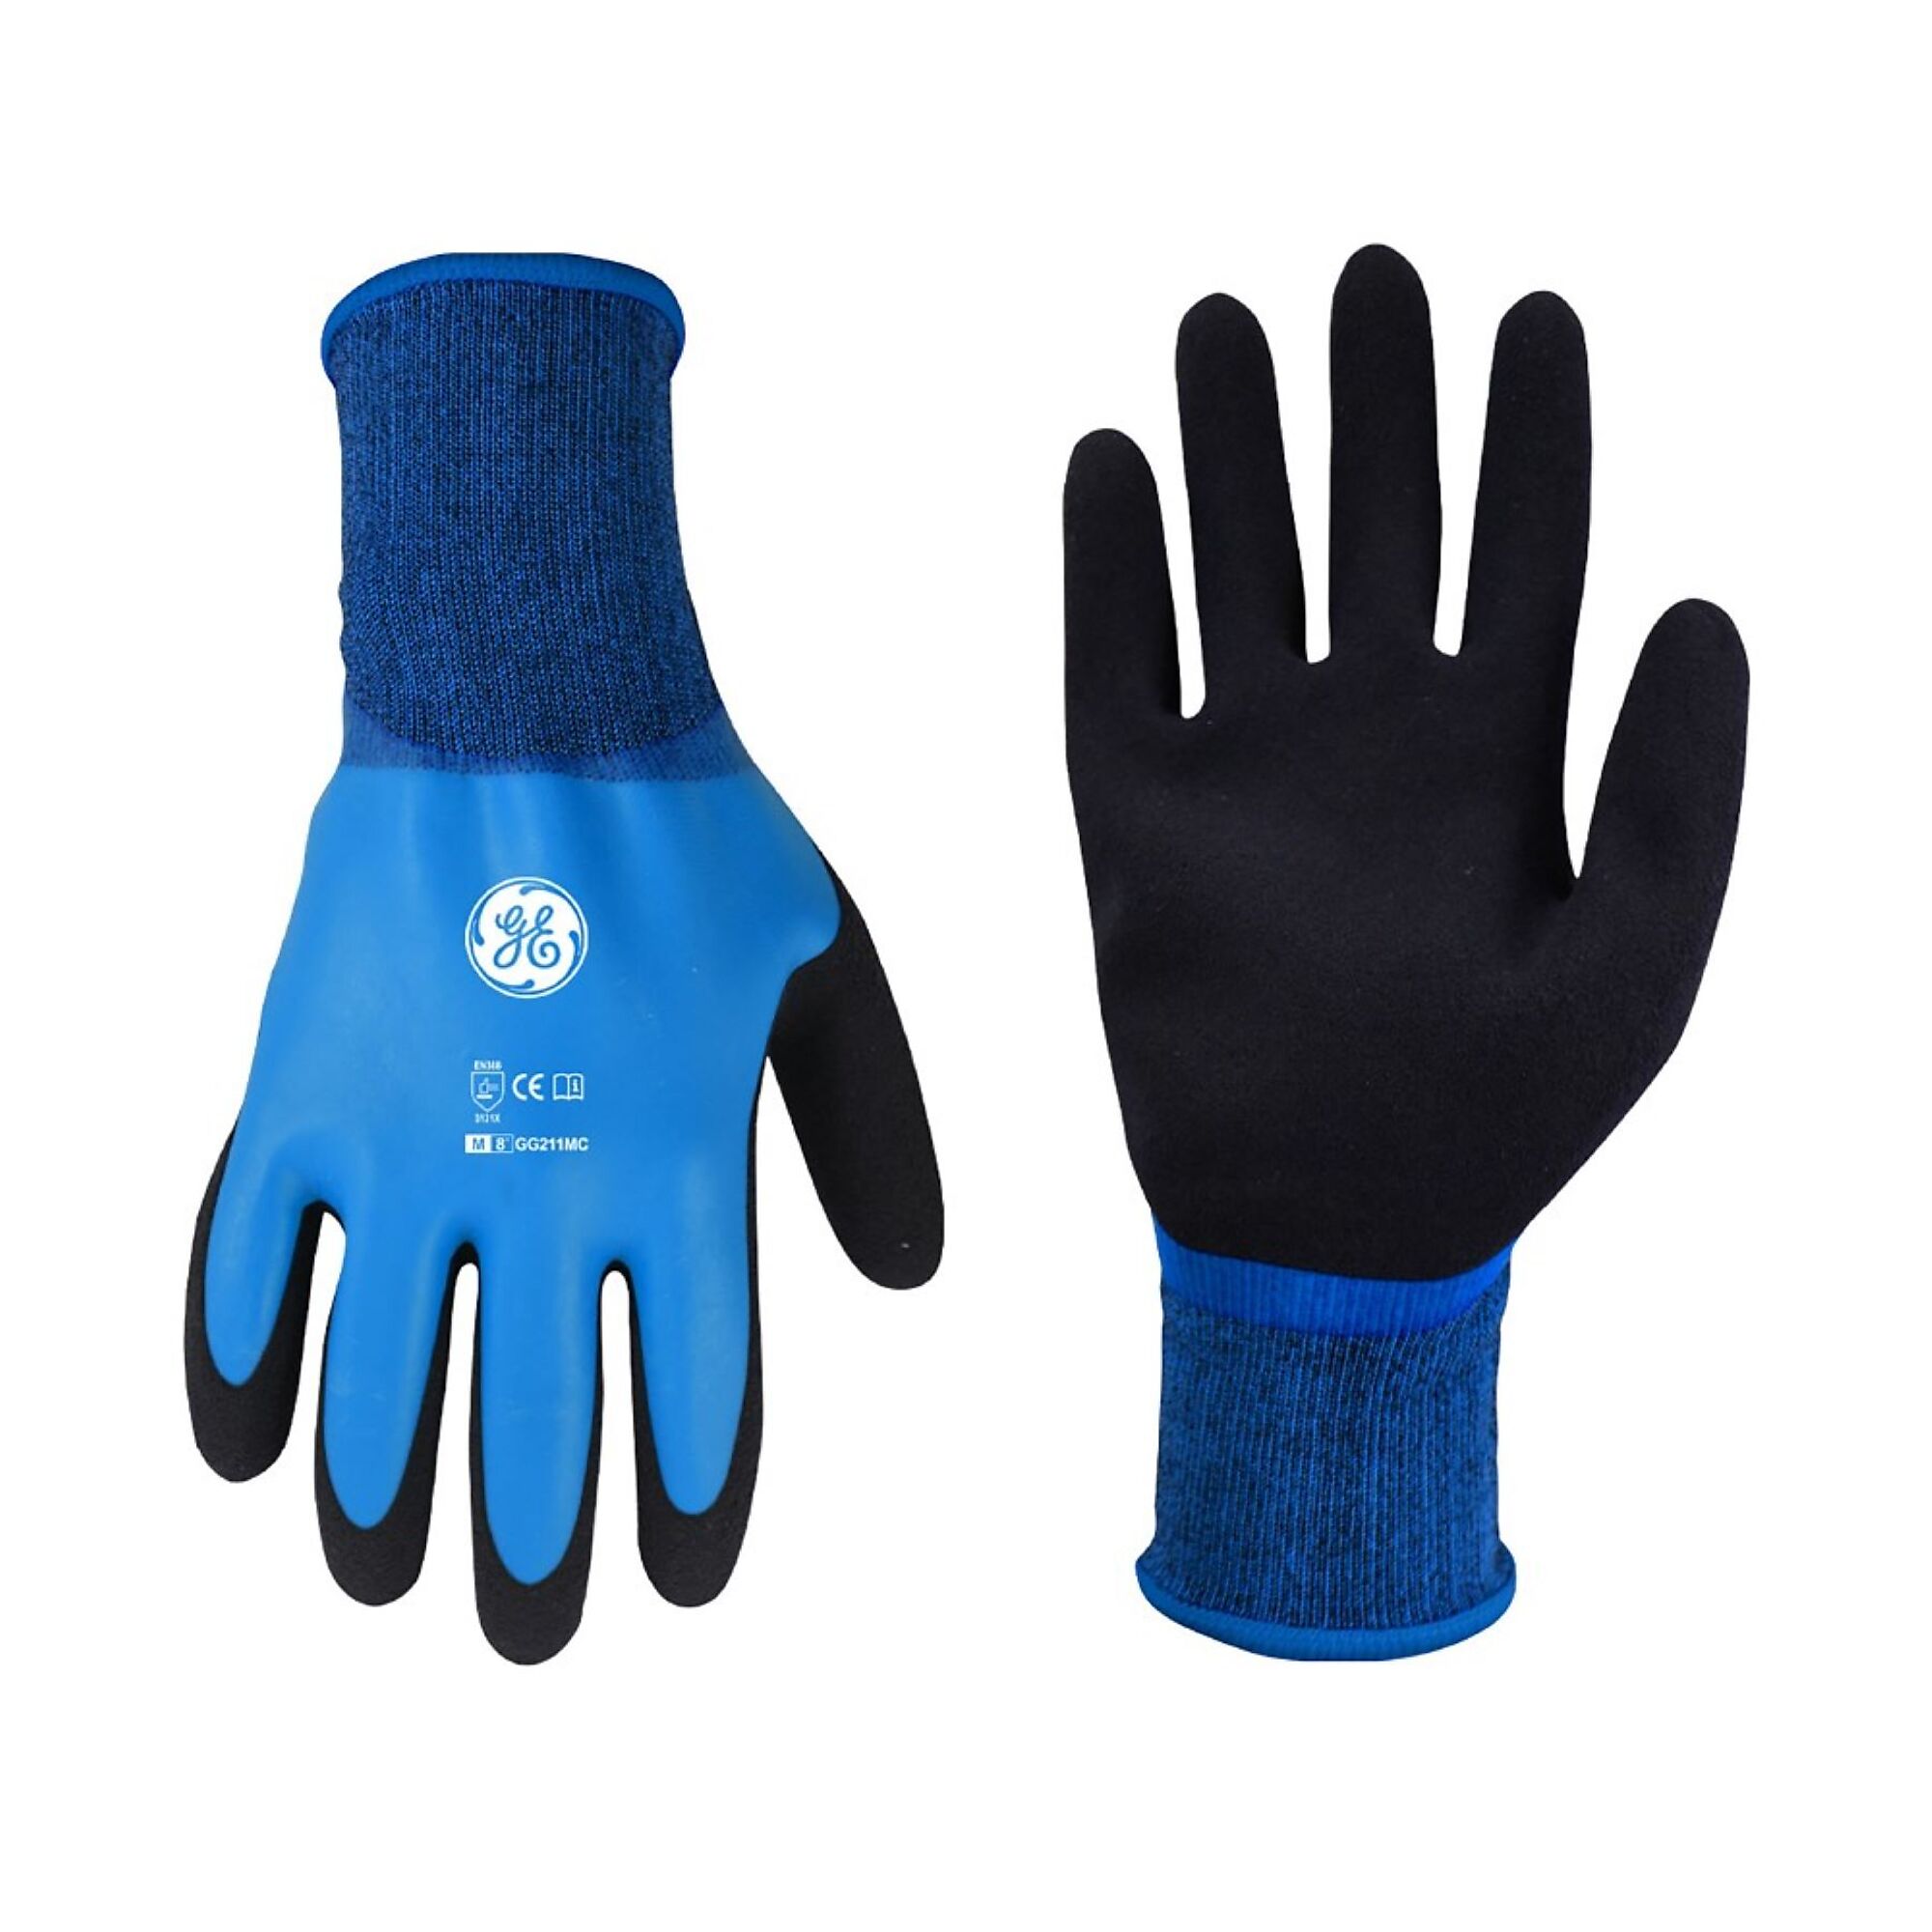 General Electric, Unisex Dipped Gloves Black/Blue M 12 pair, Size M, Included (qty.) 12, Model GG211M